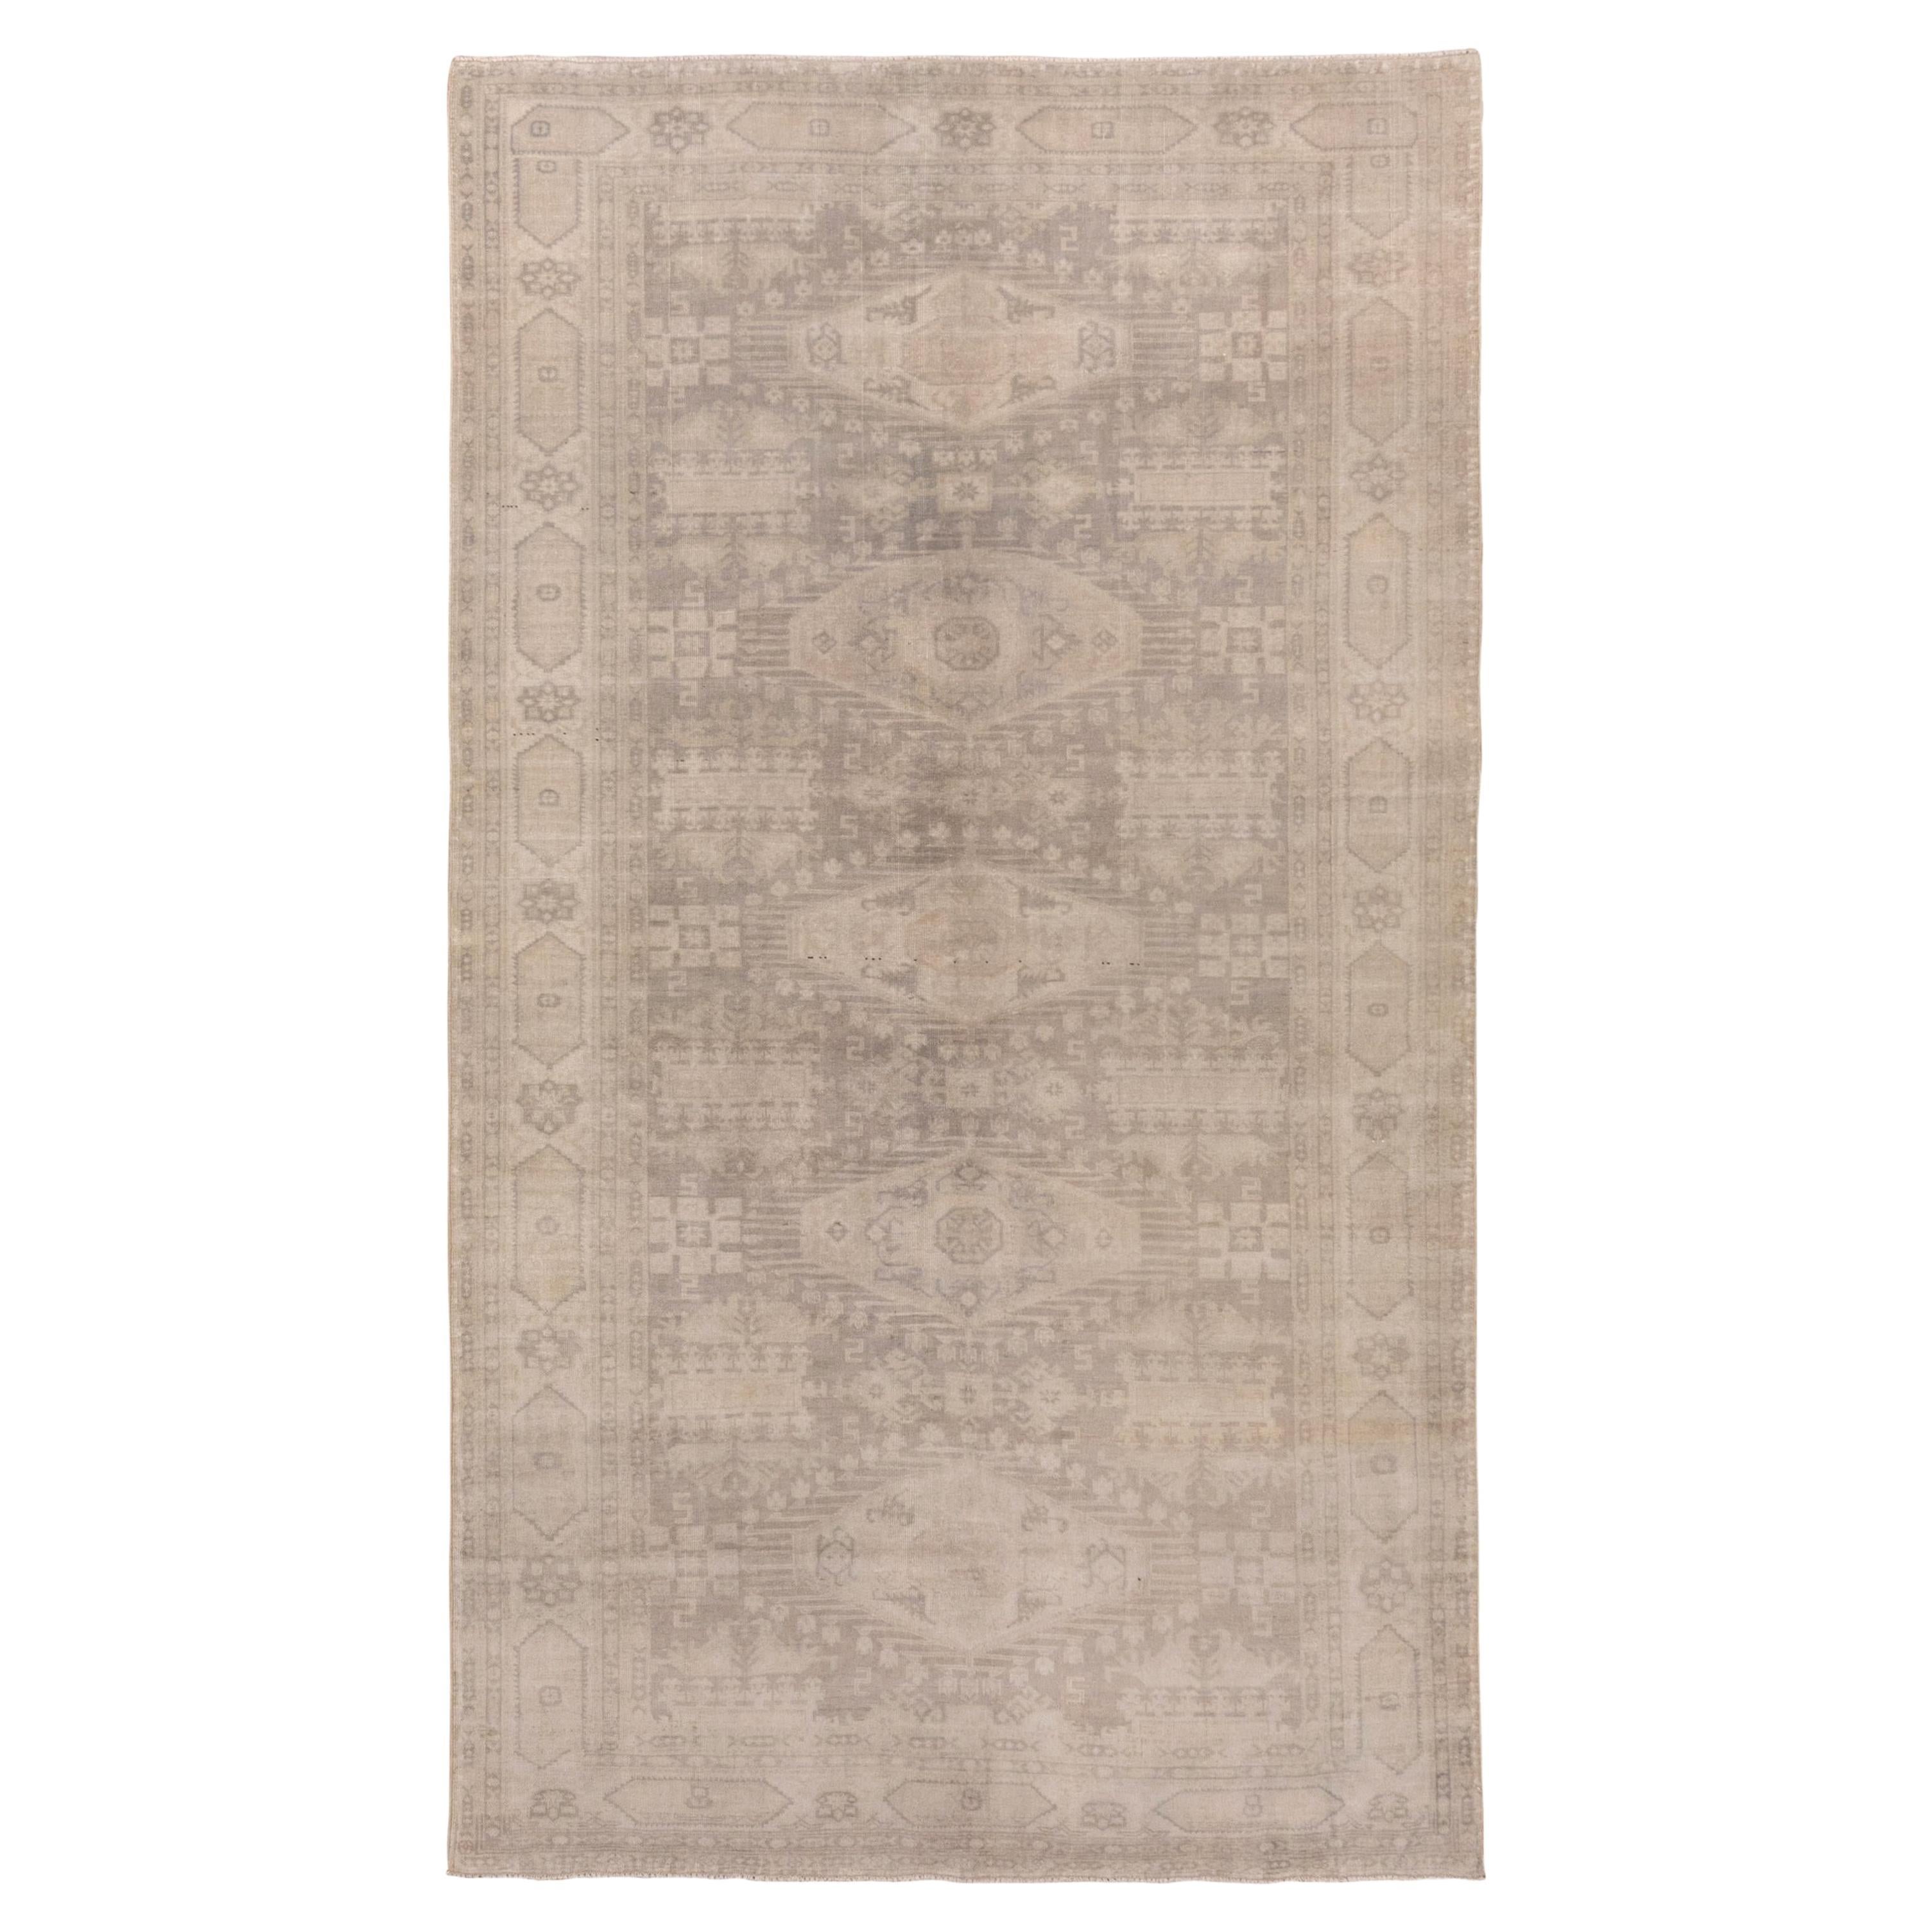 Antique Gray Turkish Sivas Rug, Gray Field, Ivory Borders For Sale